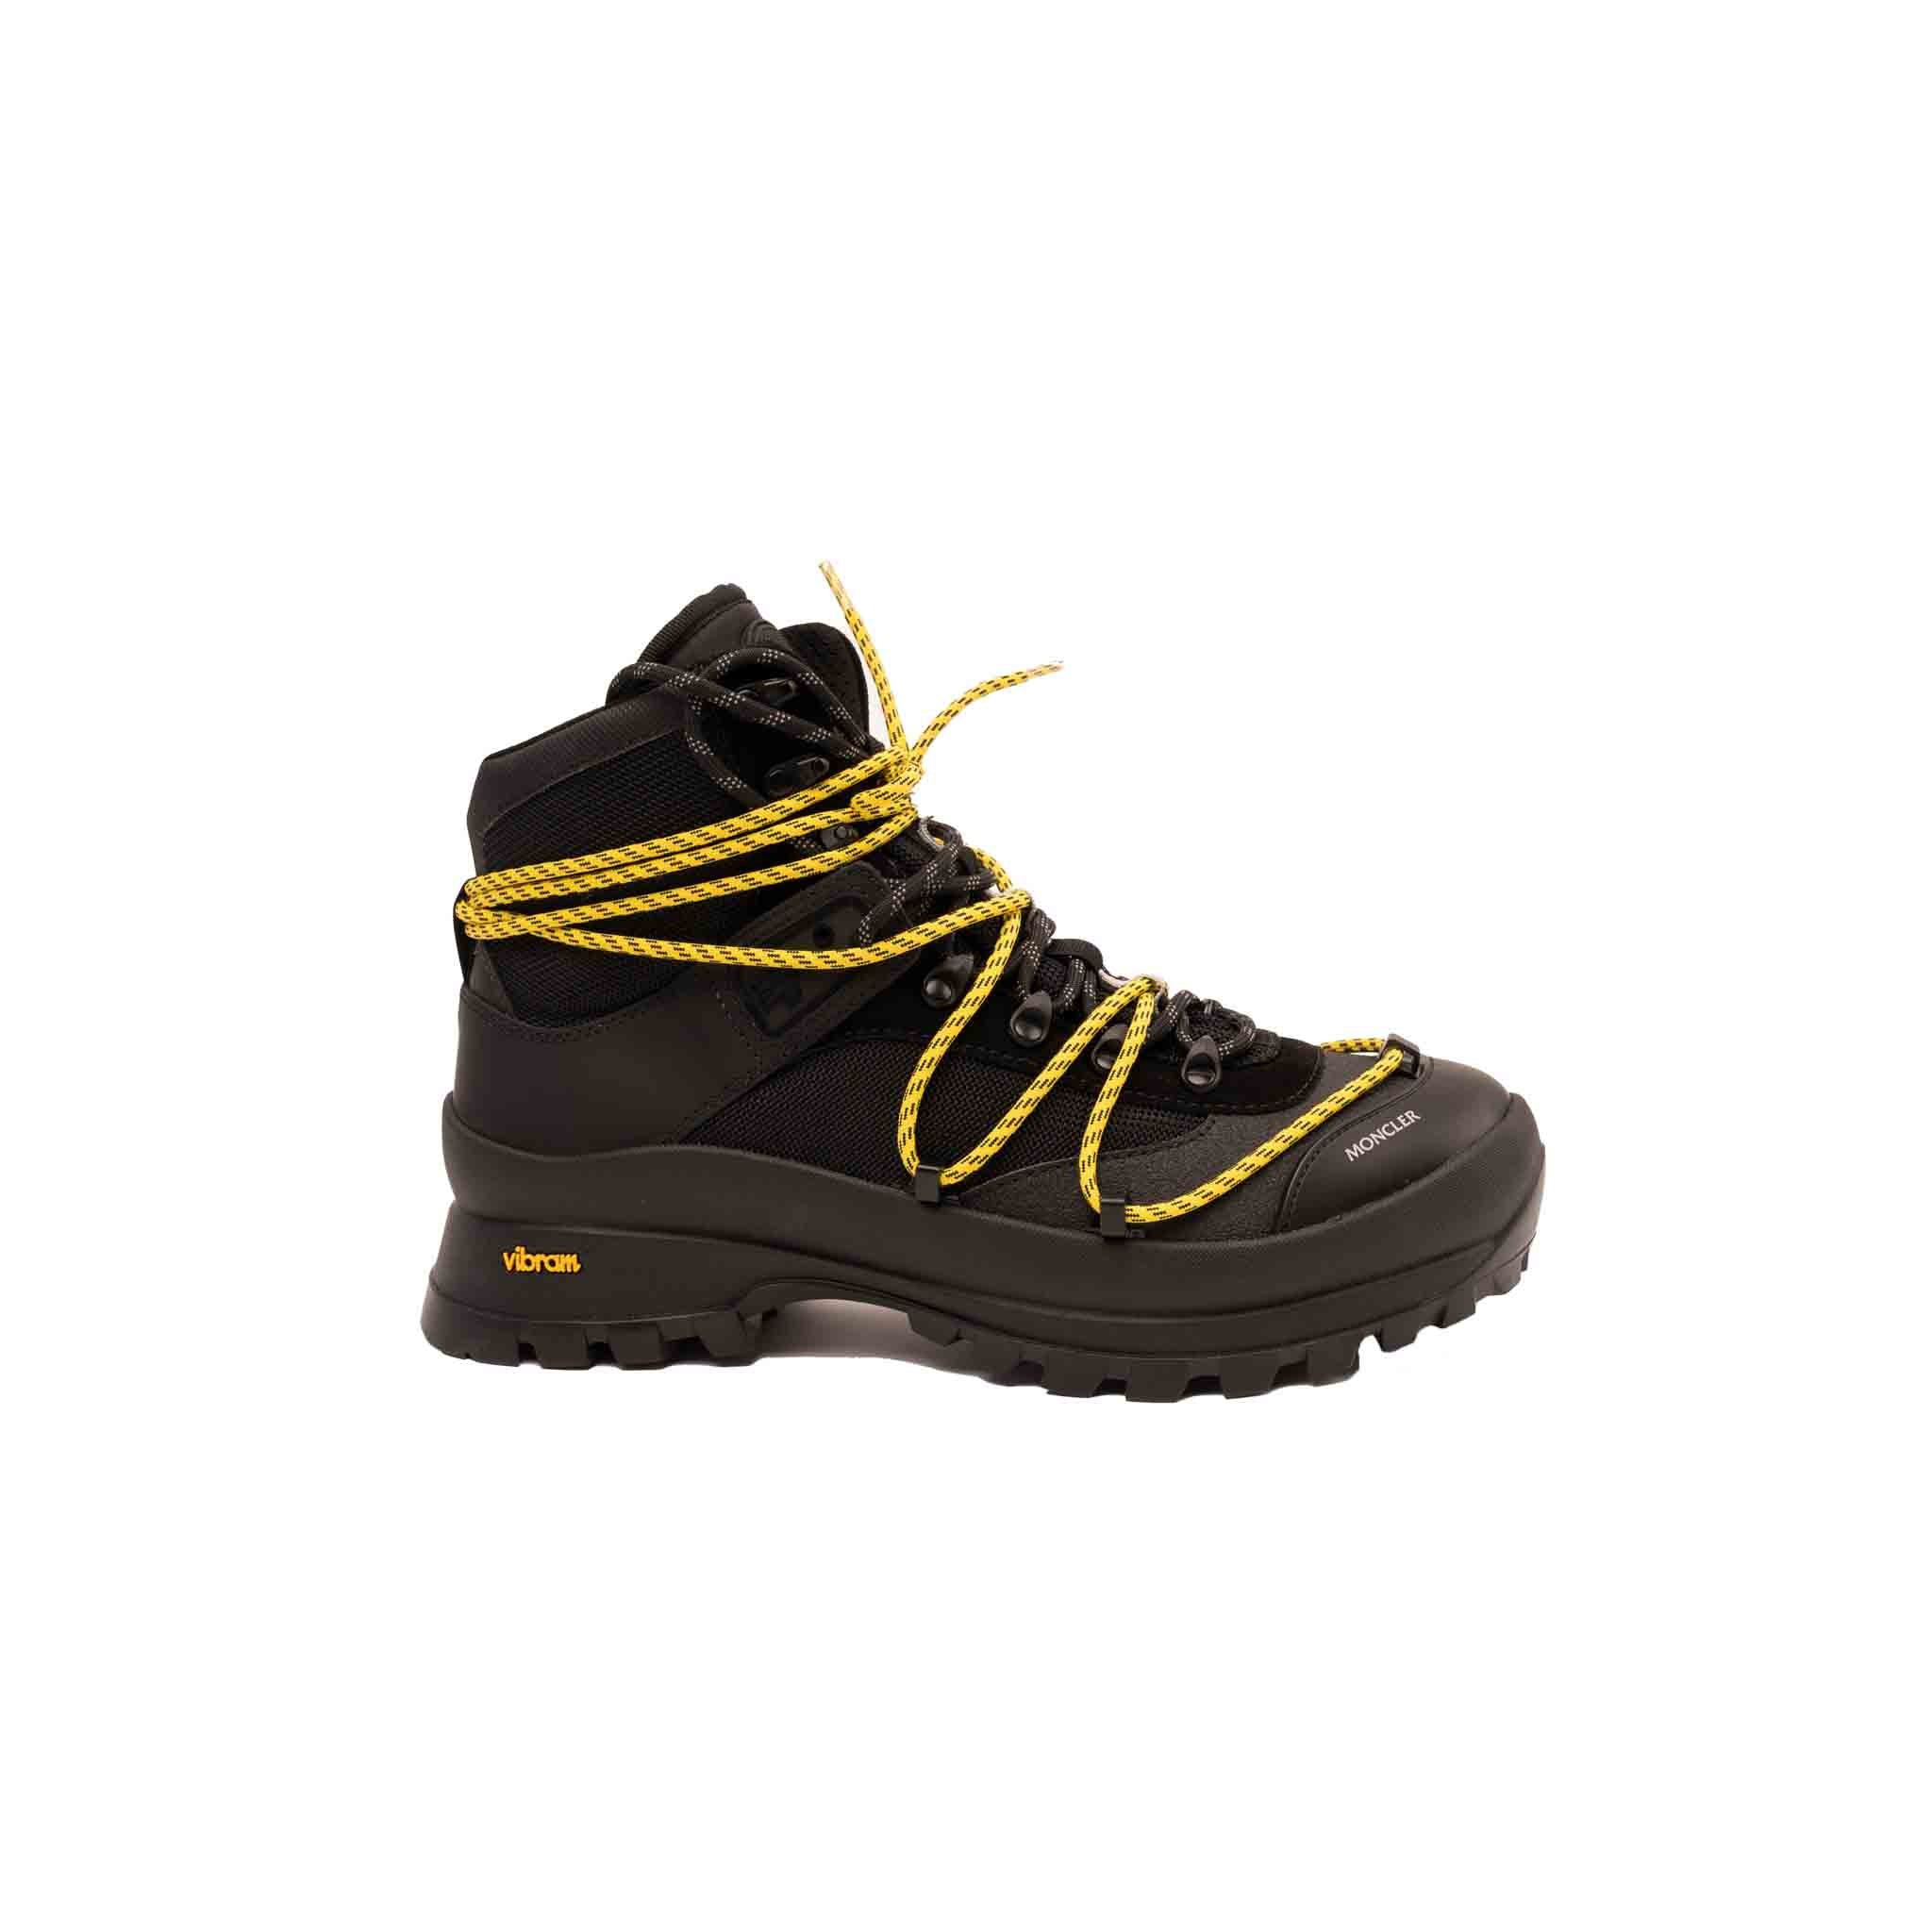 Ankle-high mesh boots in black. Tonal faux-suede and faux-leather trim throughout. Logo embossed in grey at round toe. Double lace-up closure in black and yellow. Rubberized logo patch and webbing daisy chain at padded tongue. Padded collar. Embossed logo at sides. Tonal treaded Vibram® rubber sole featuring yellow embossed logo at outer side